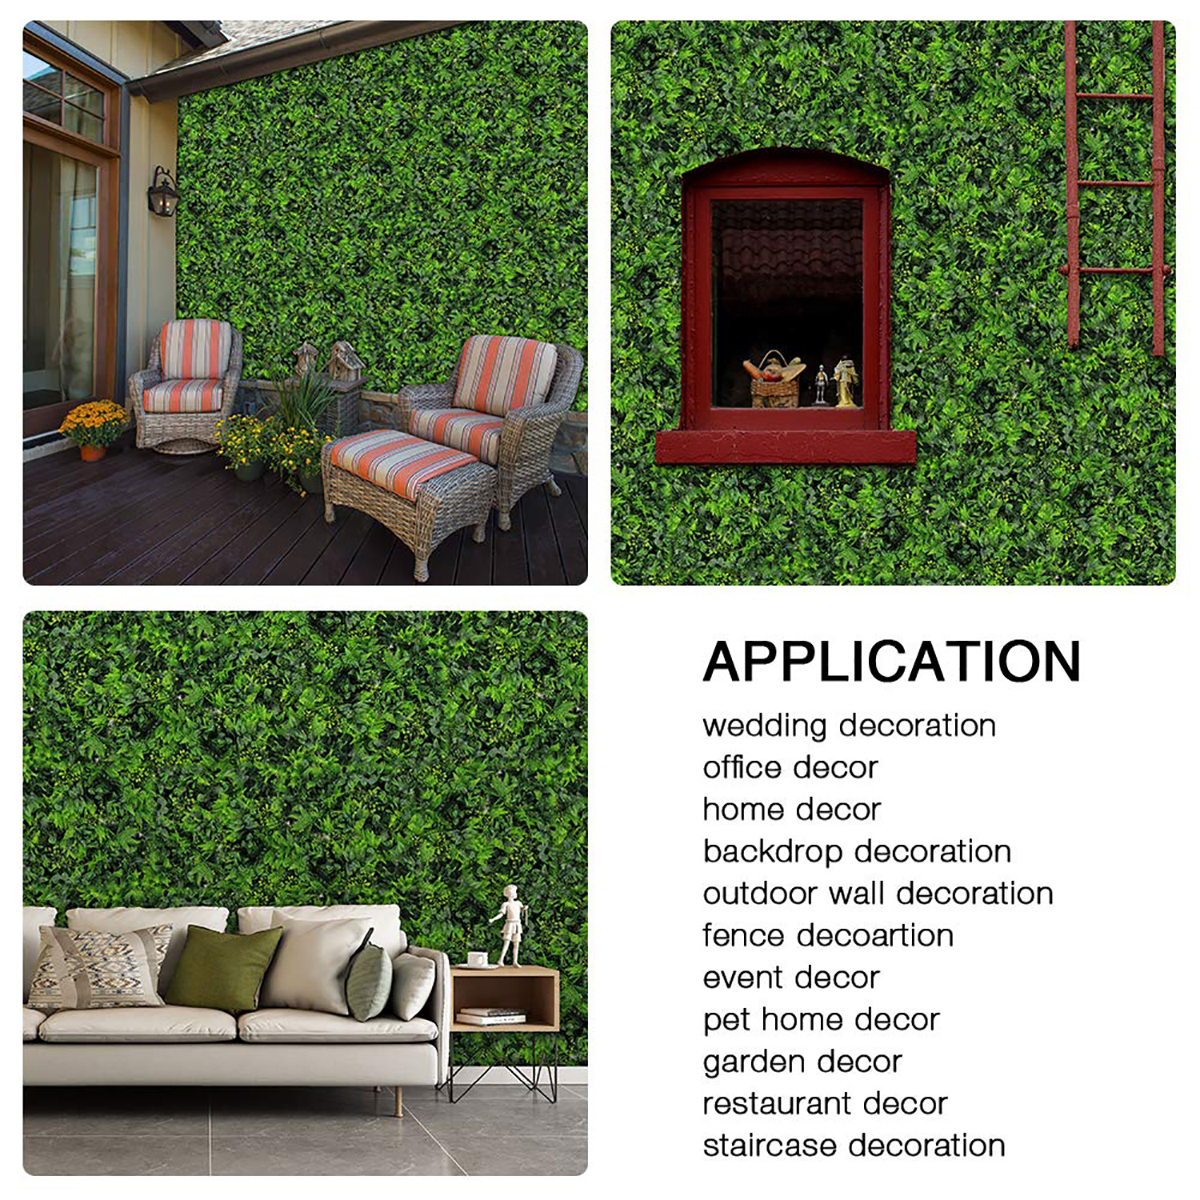 4060CM-Artificial-Topiary-Hedges-Panels-Plastic-Faux-Shrubs-Fence-Mat-Greenery-Wall-Backdrop-Decor-G-1729461-2